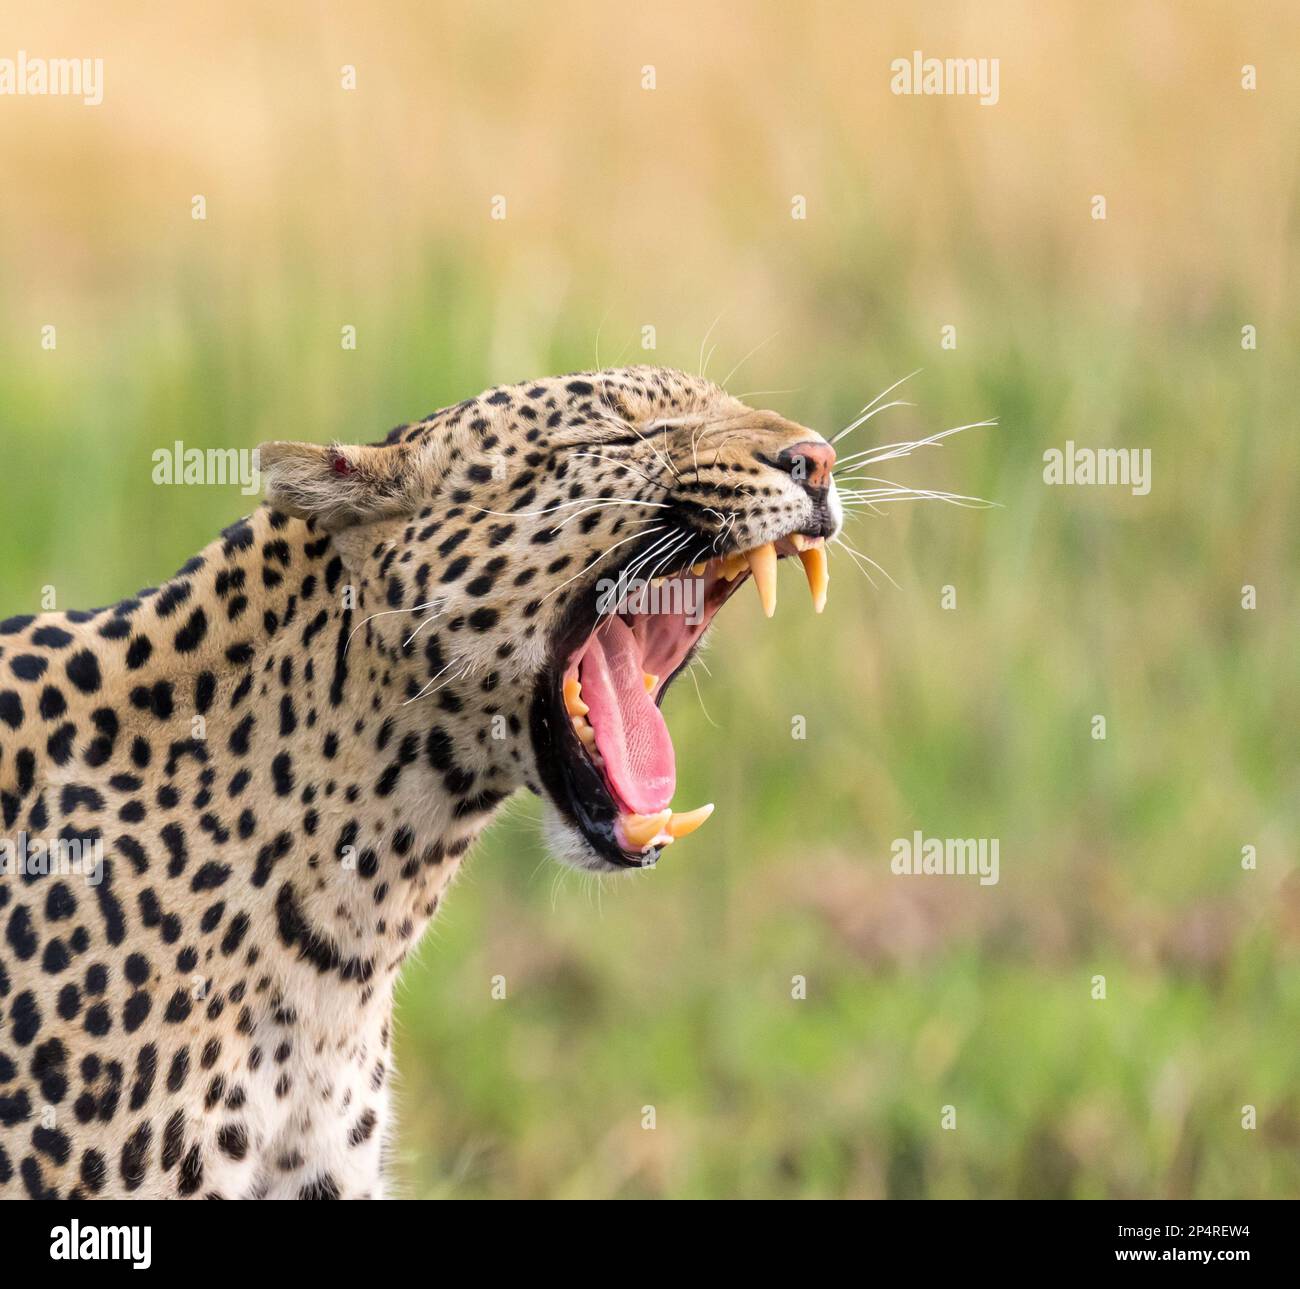 Leopard with wide open mouth yawning in Botswana Khwai Stock Photo